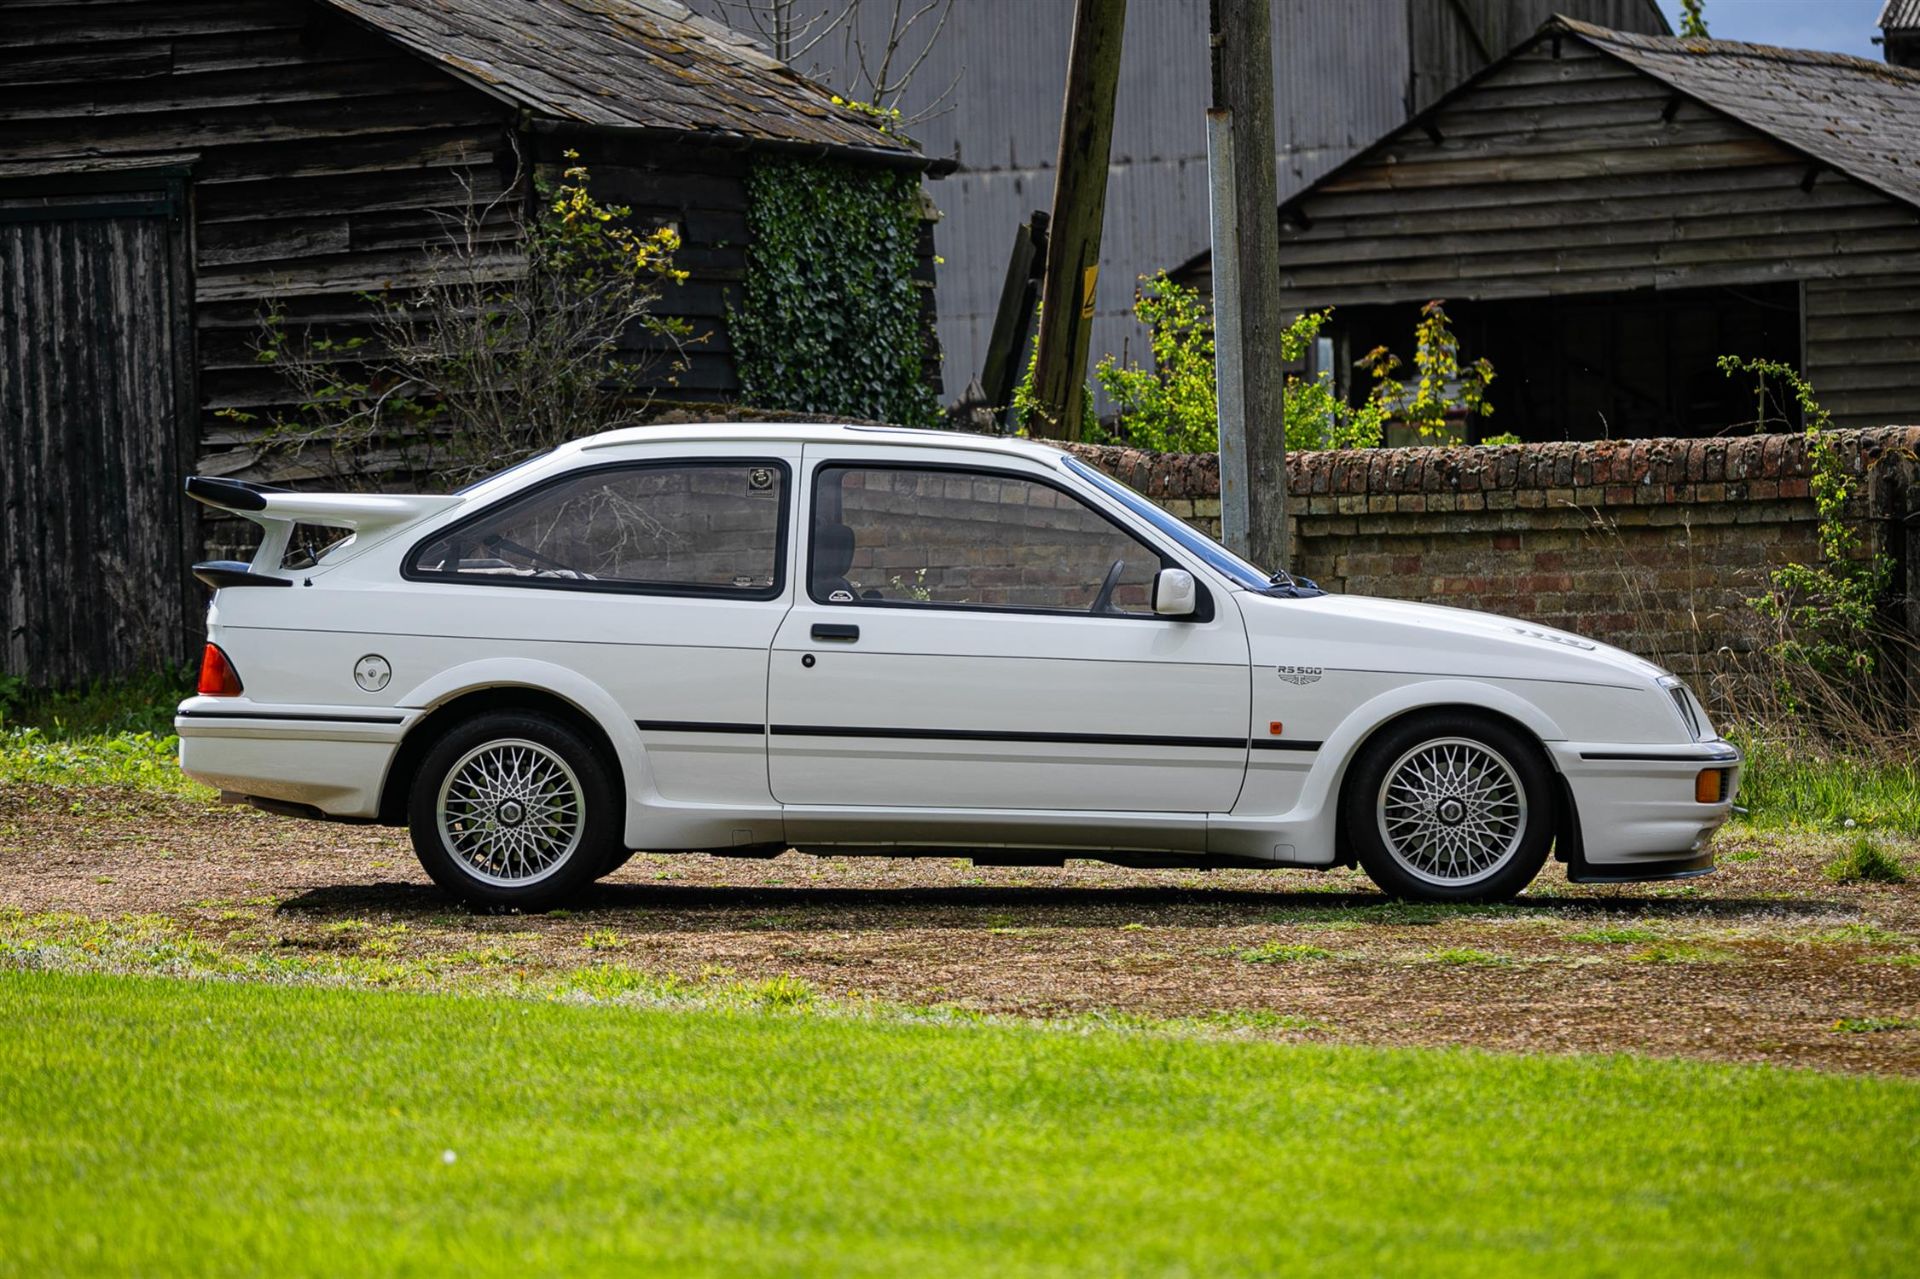 1987 Ford Sierra RS500 Cosworth #433 - 12,805 Miles - Image 5 of 10